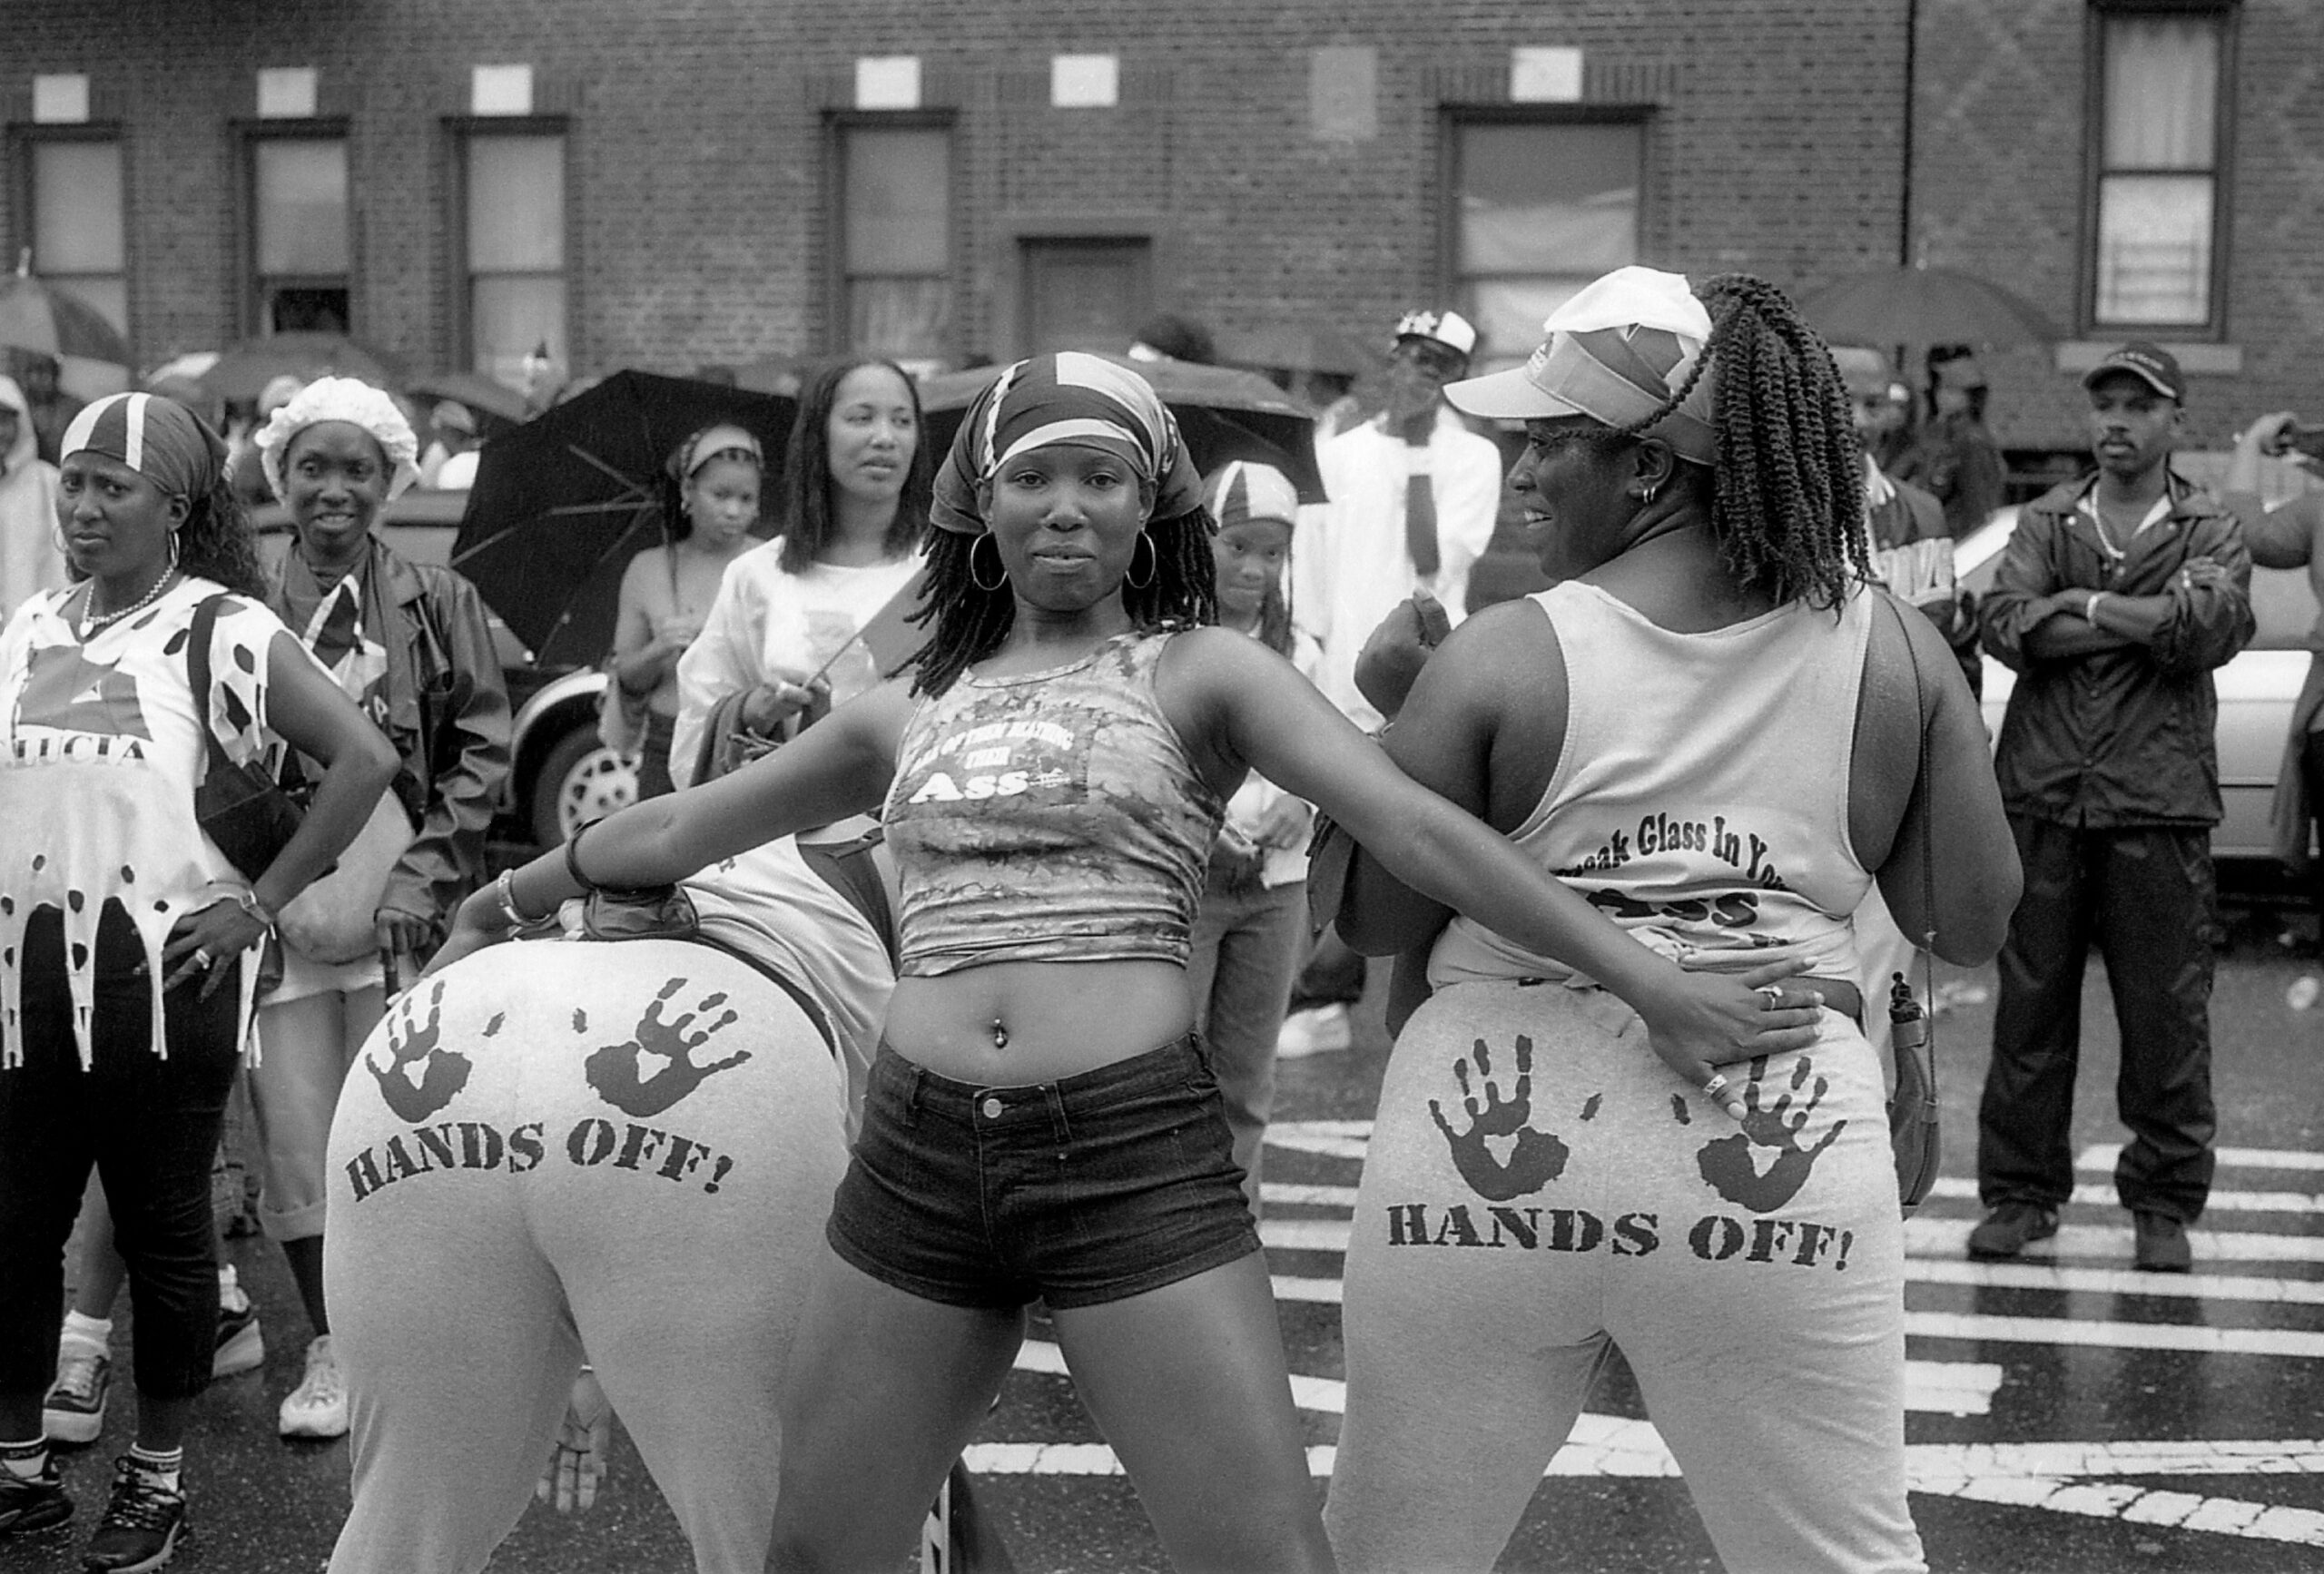 Hands Off, Brooklyn, NY, 1998 (West Indian Day Parade, Eastern Pkwy, Brooklyn, NY)